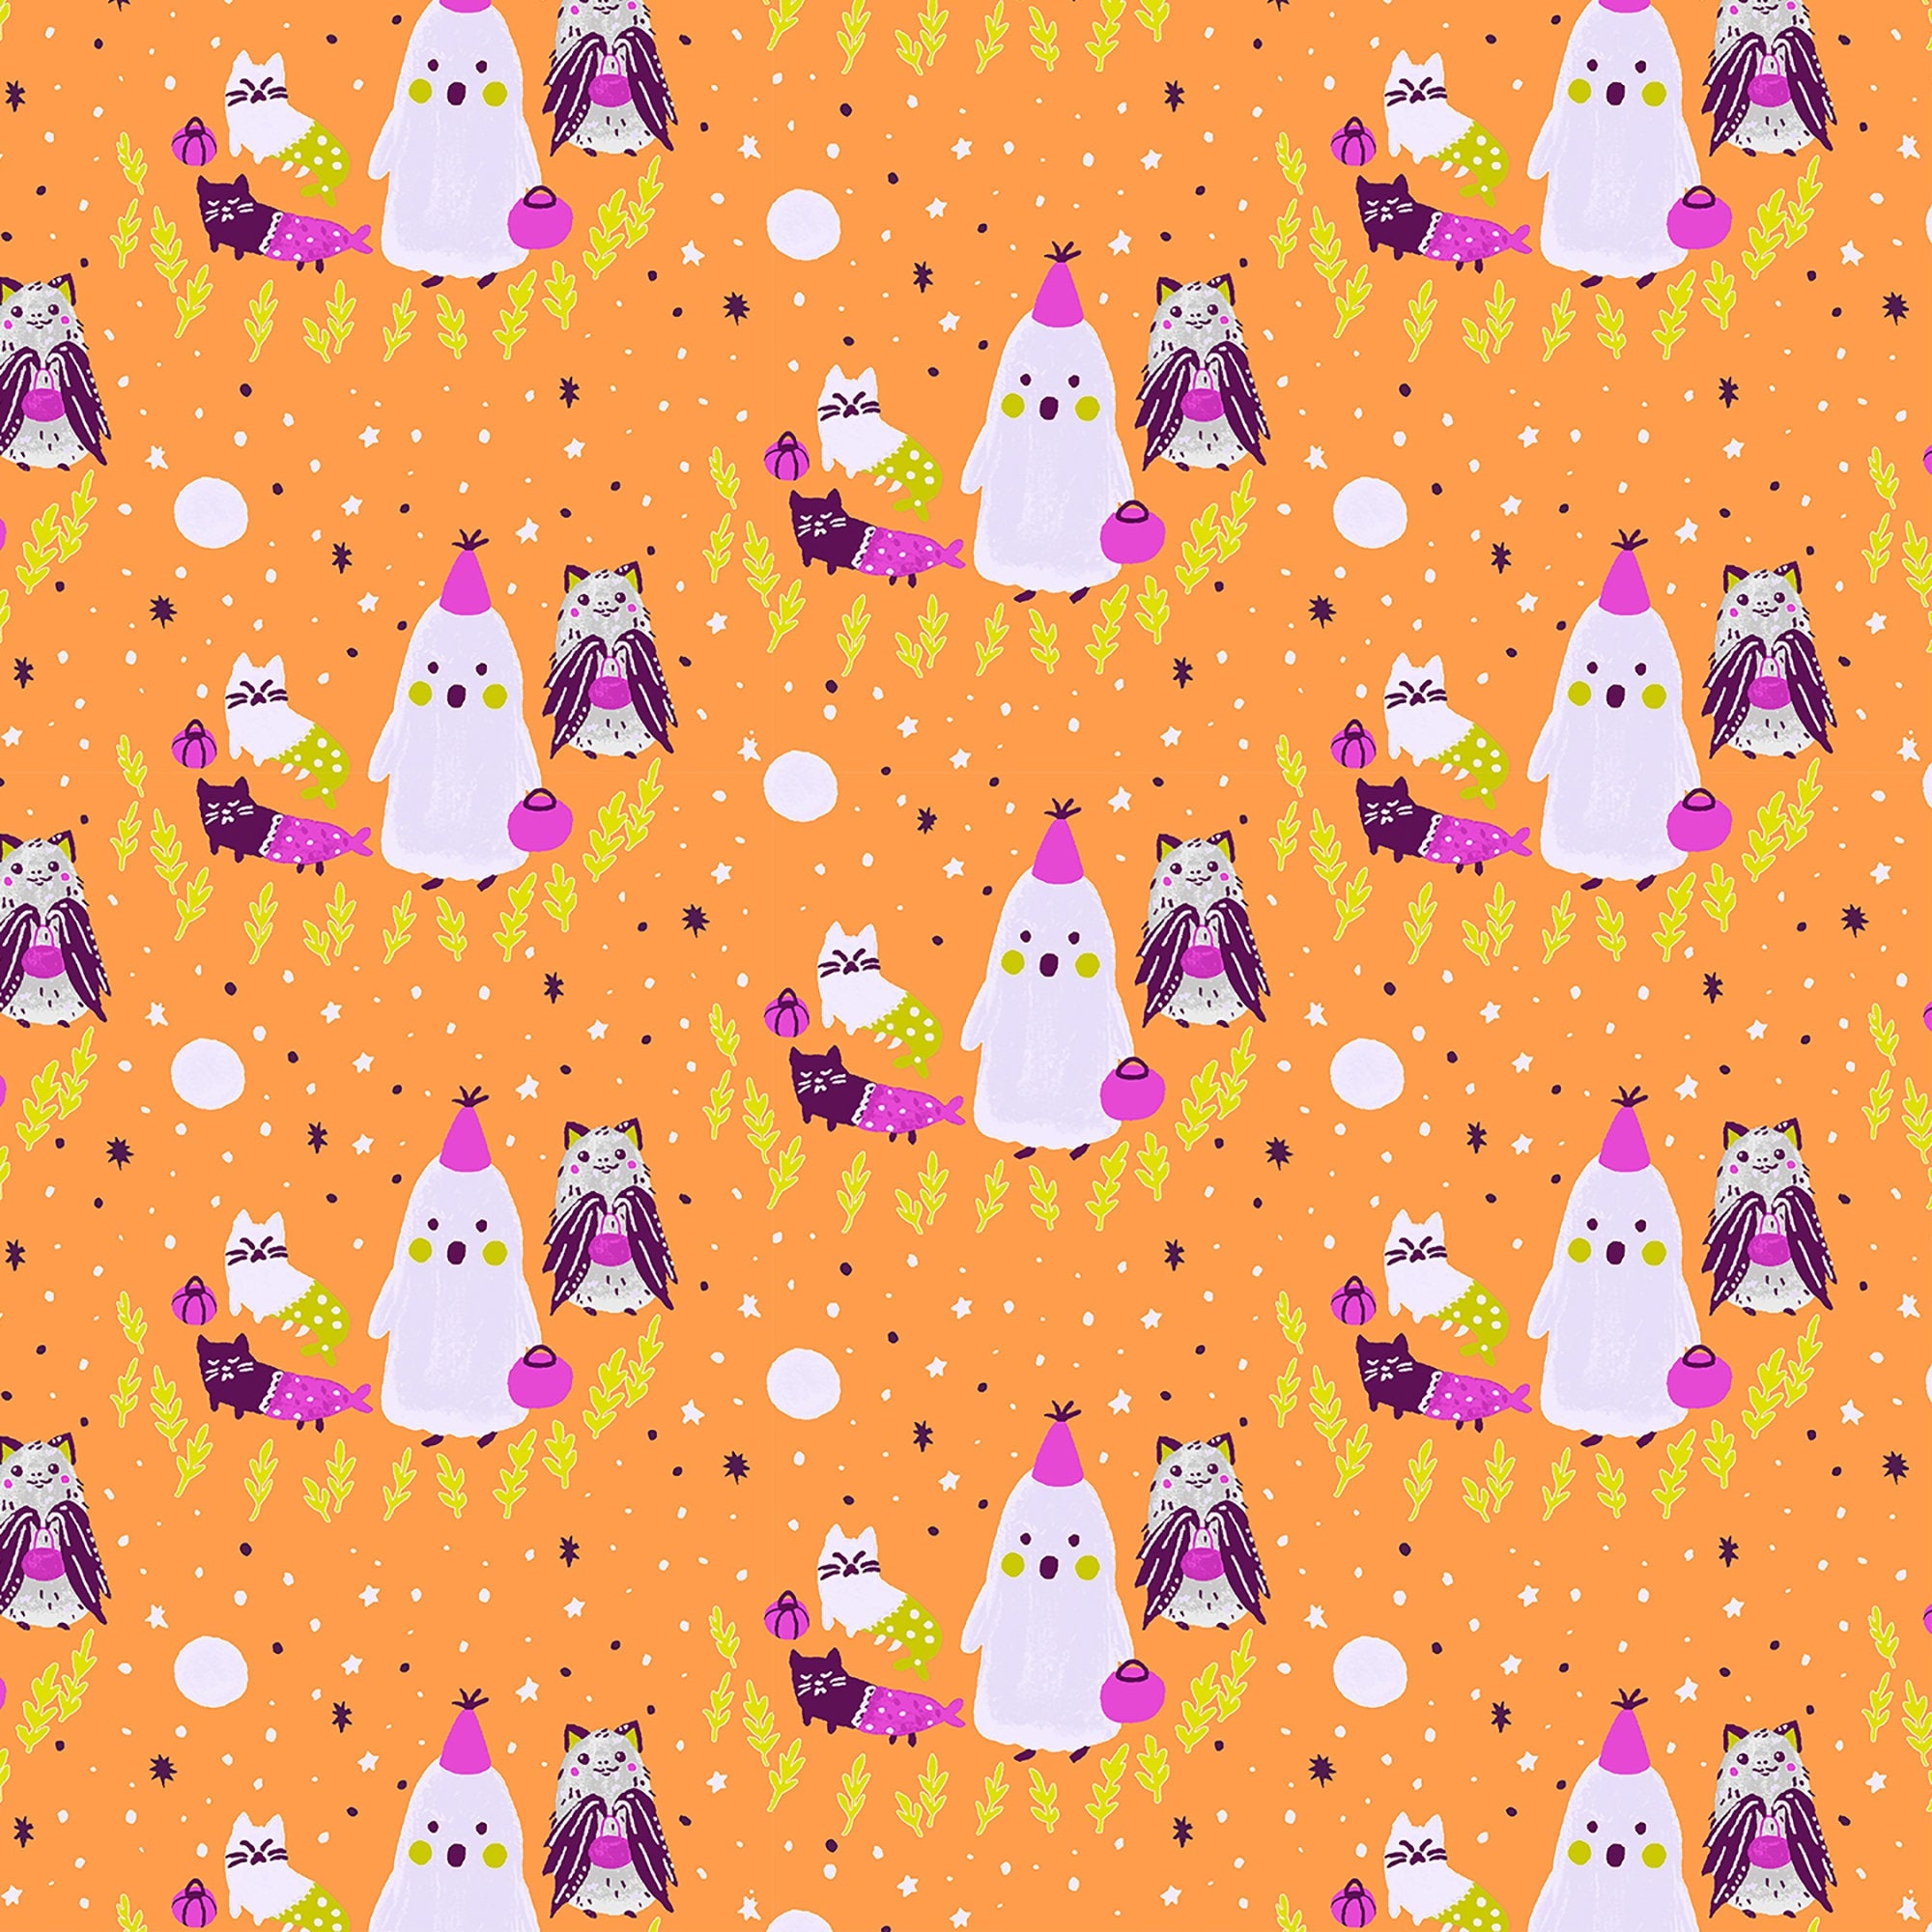 Bring Your Own Boos - Ghoul's Night J-E-L-L-Glow Fabric